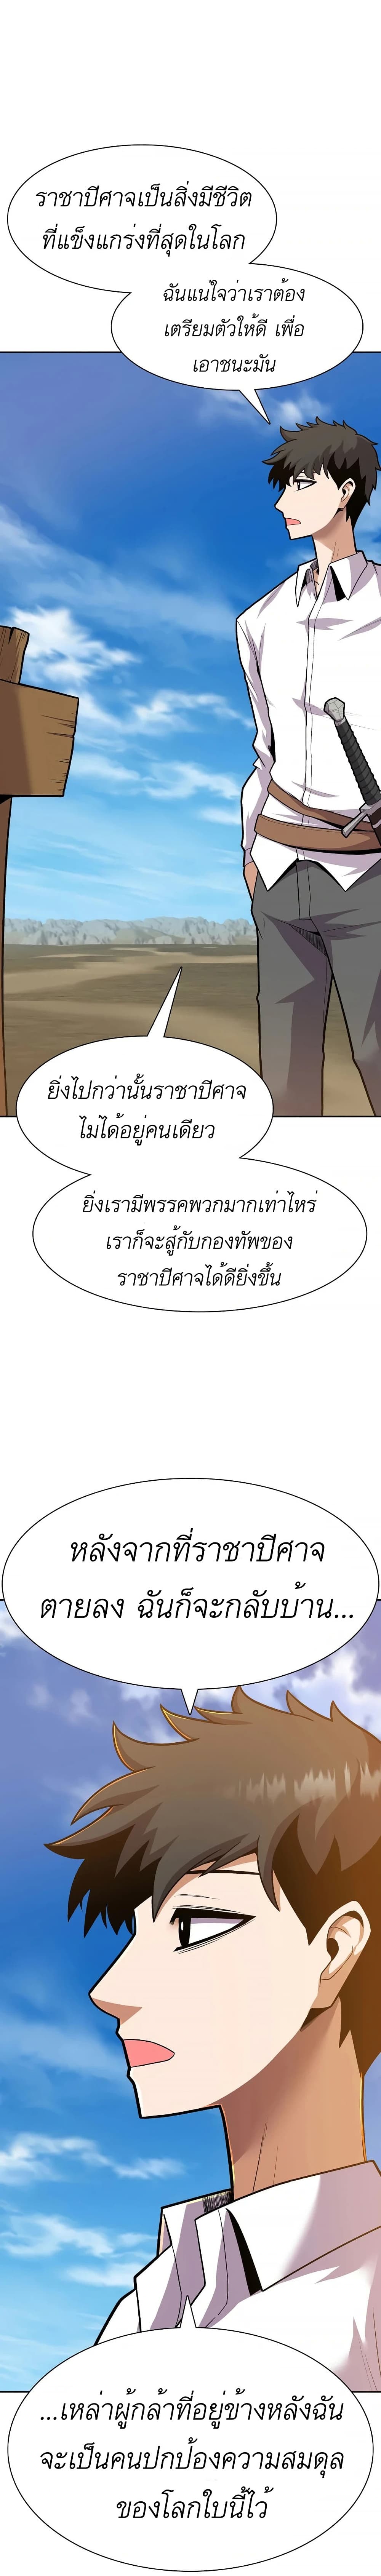 Raising Newbie Heroes In Another World ตอนที่ 11 (5)